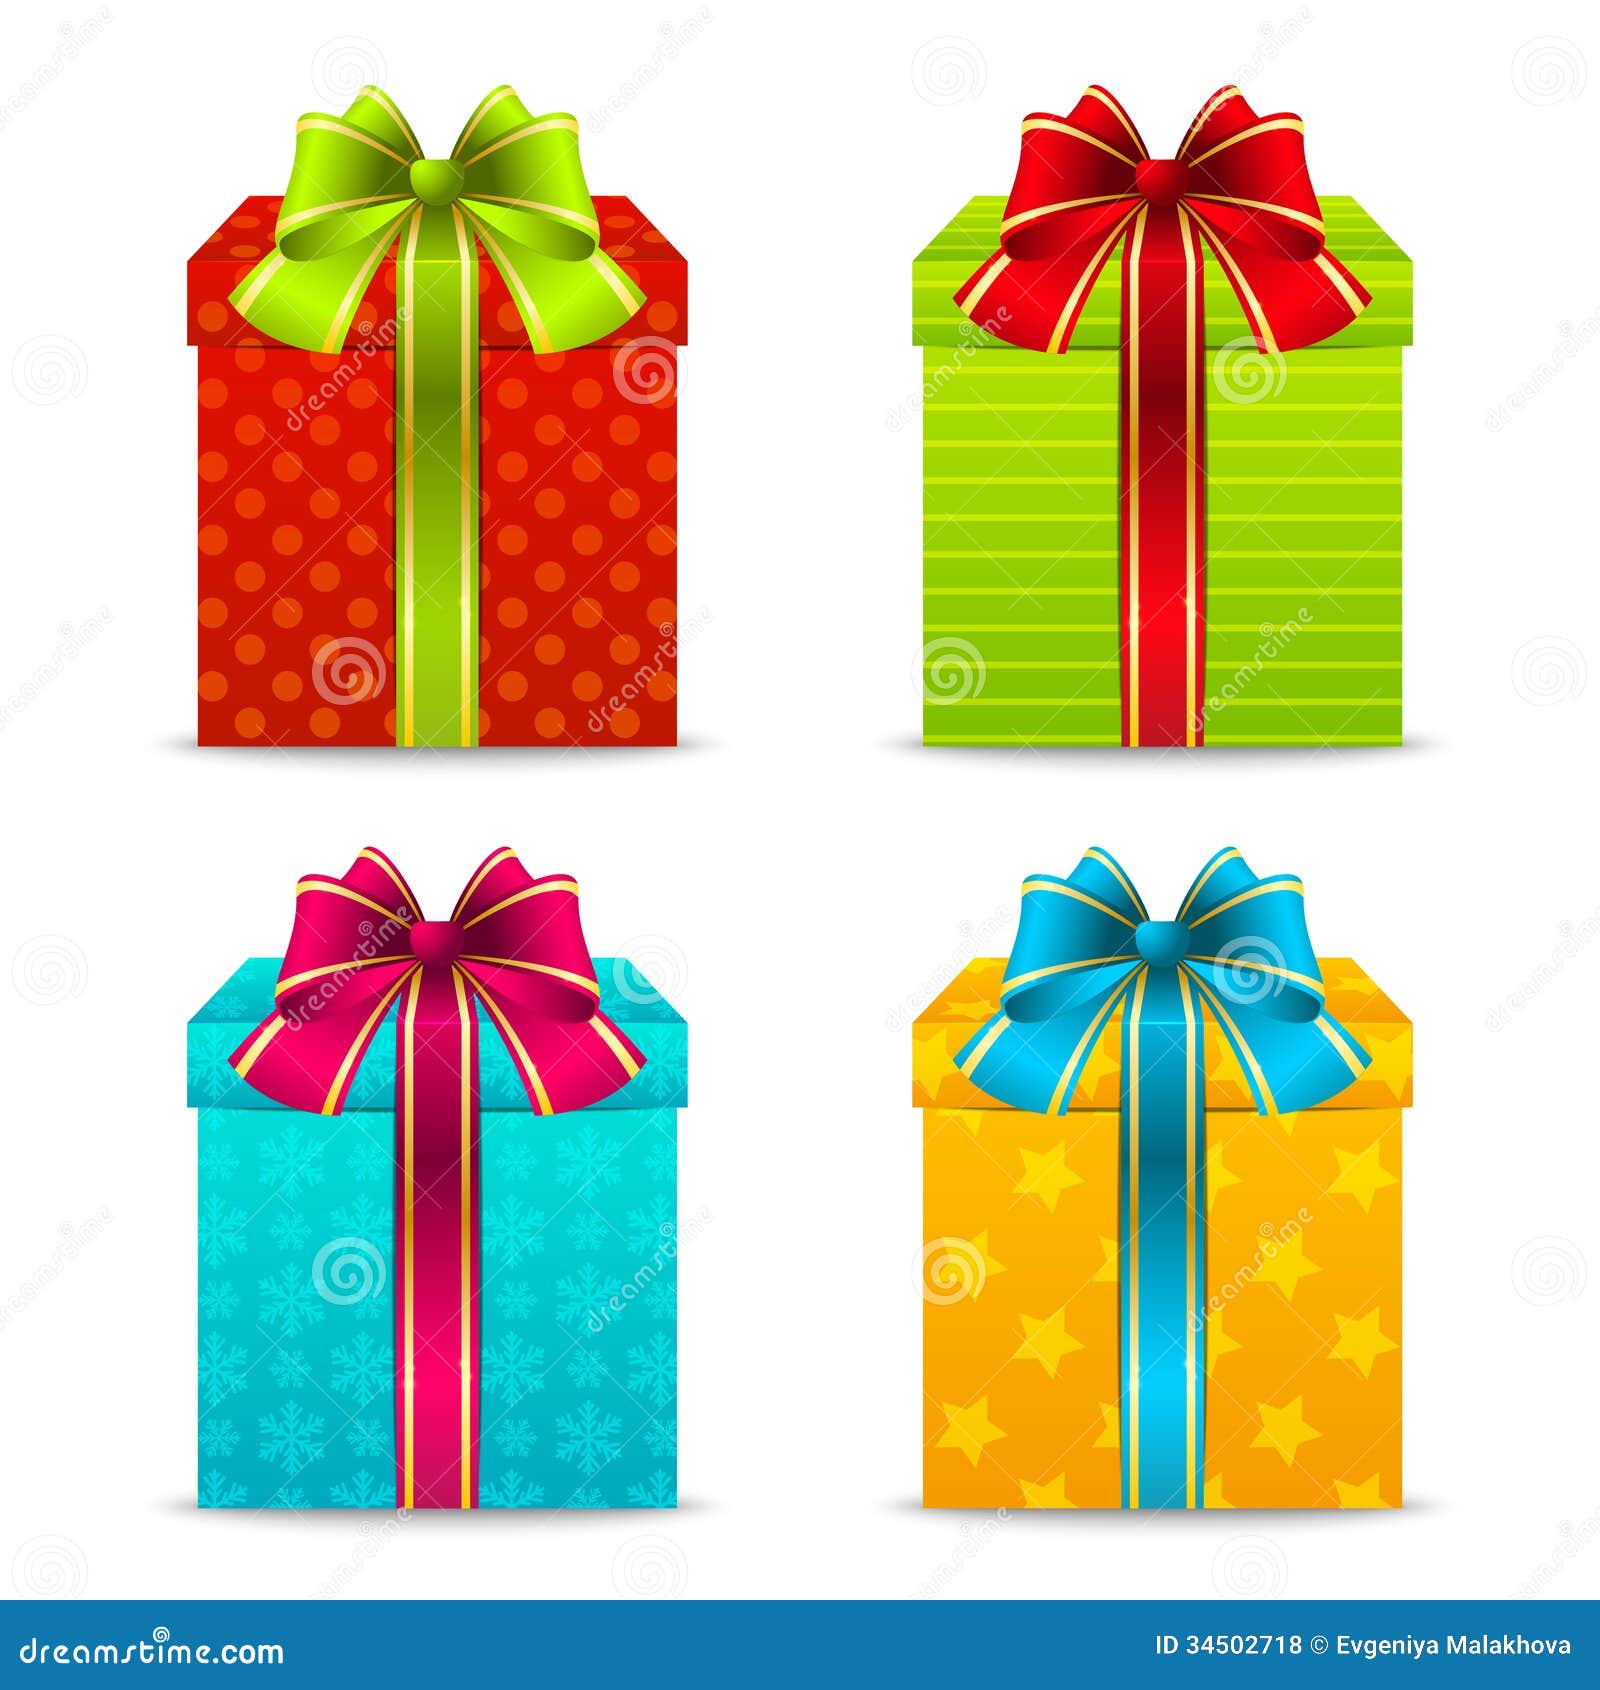 clip art pictures of christmas presents - photo #36